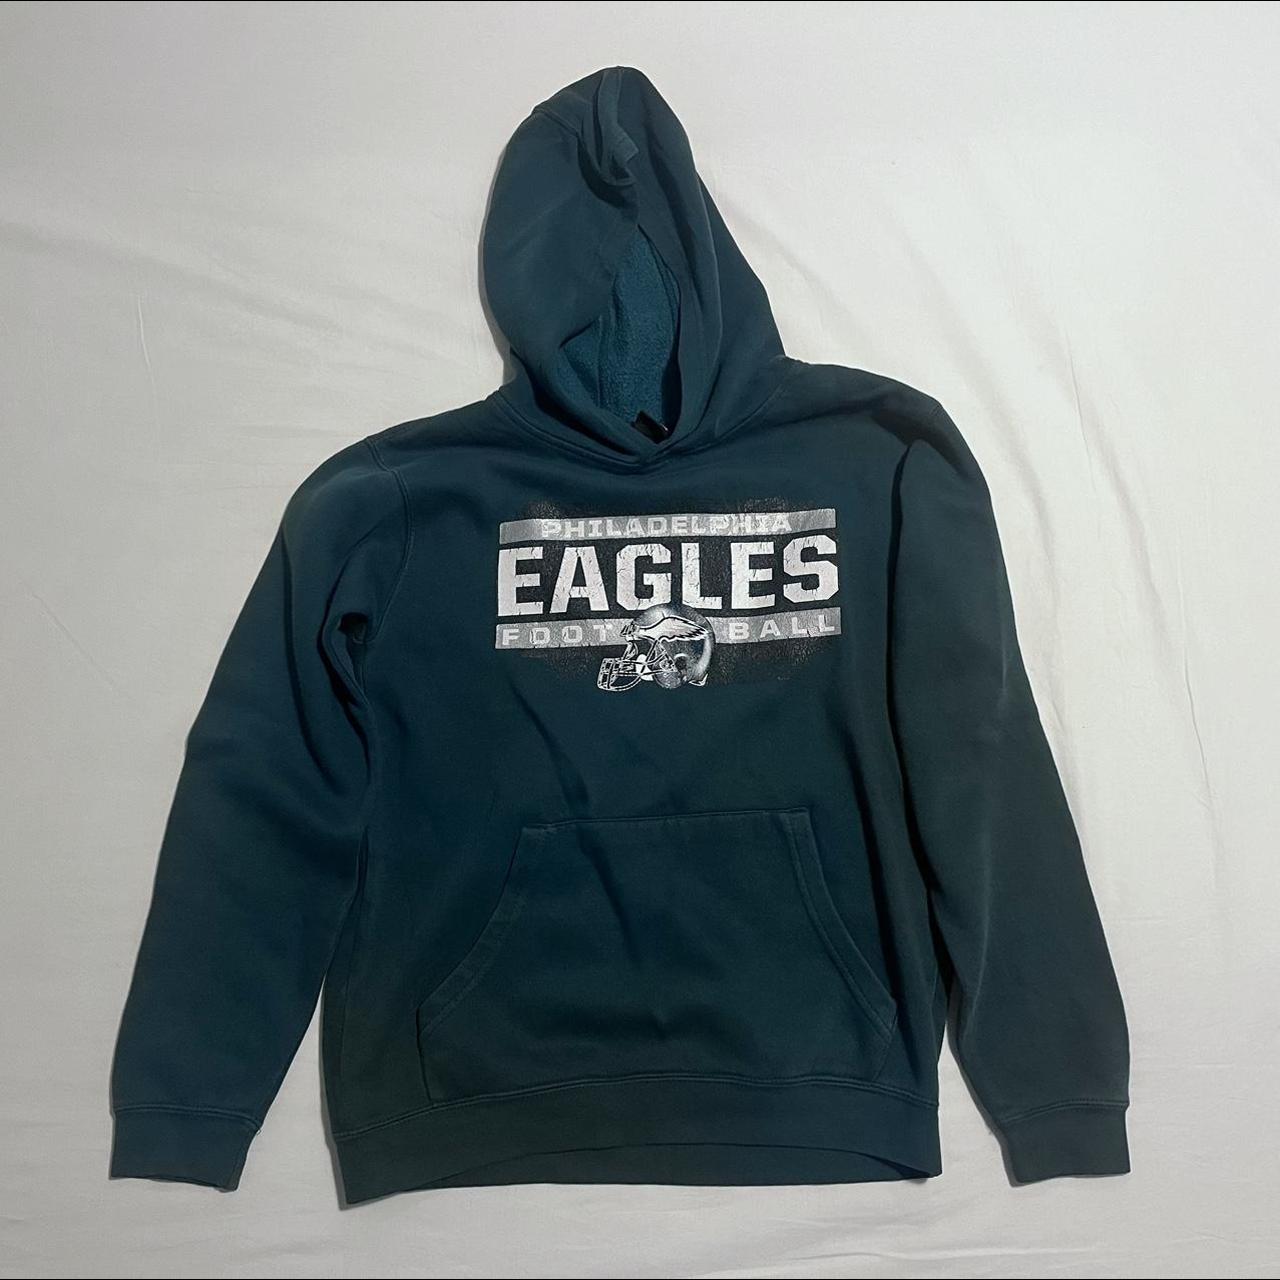 NFL eagles green hoodie kids size XL or adults size S/M - Depop